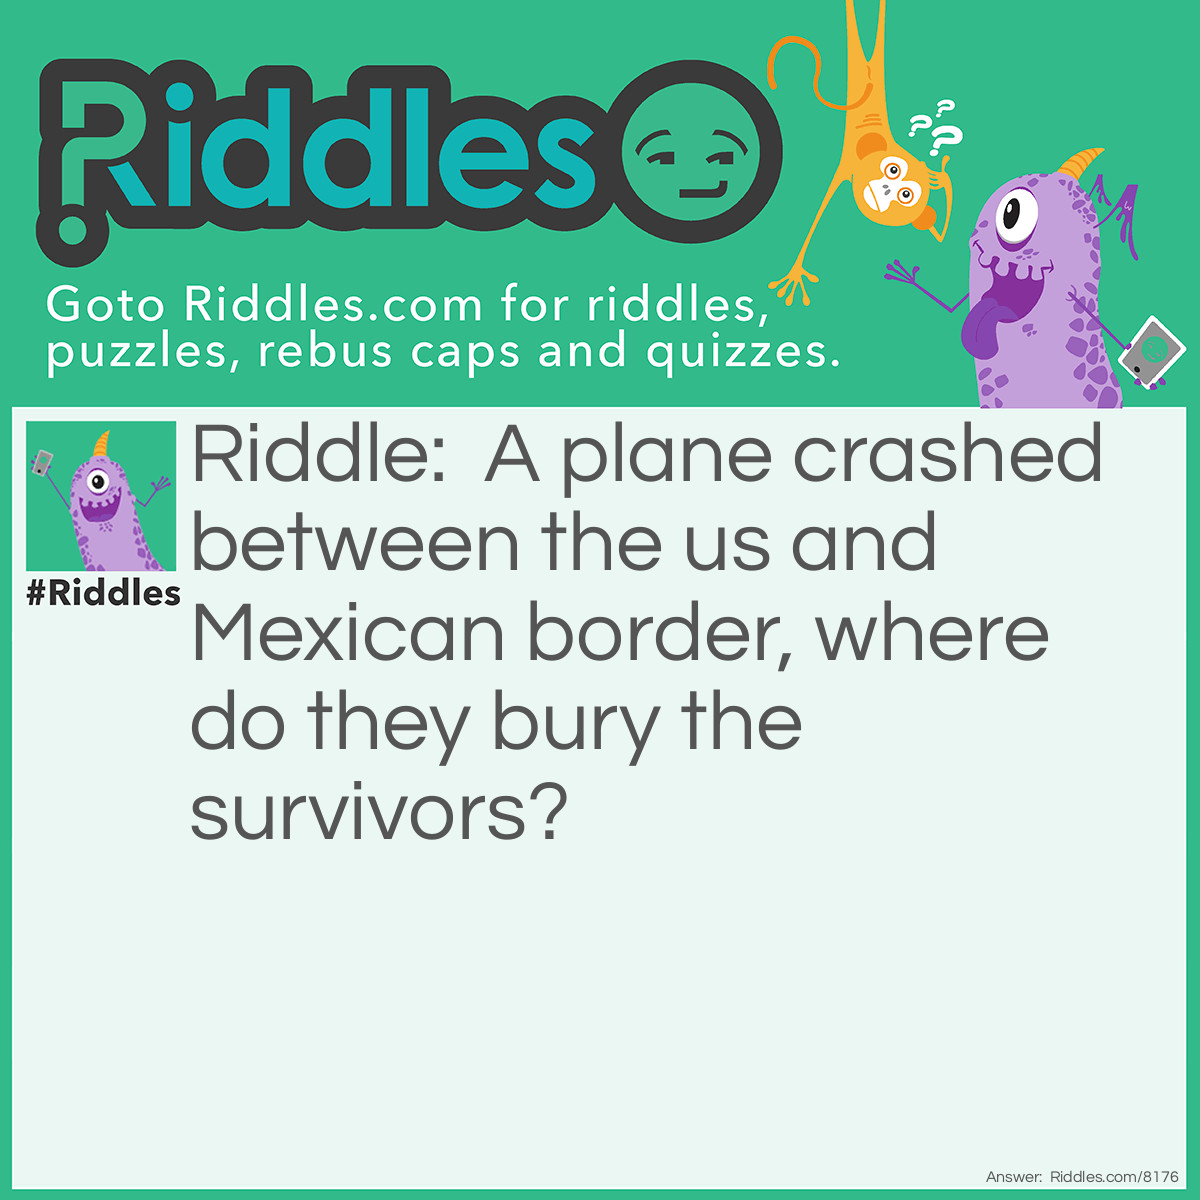 Riddle: A plane crashed between the us and Mexican border, where do they bury the survivors? Answer: You don’t burry survivors.